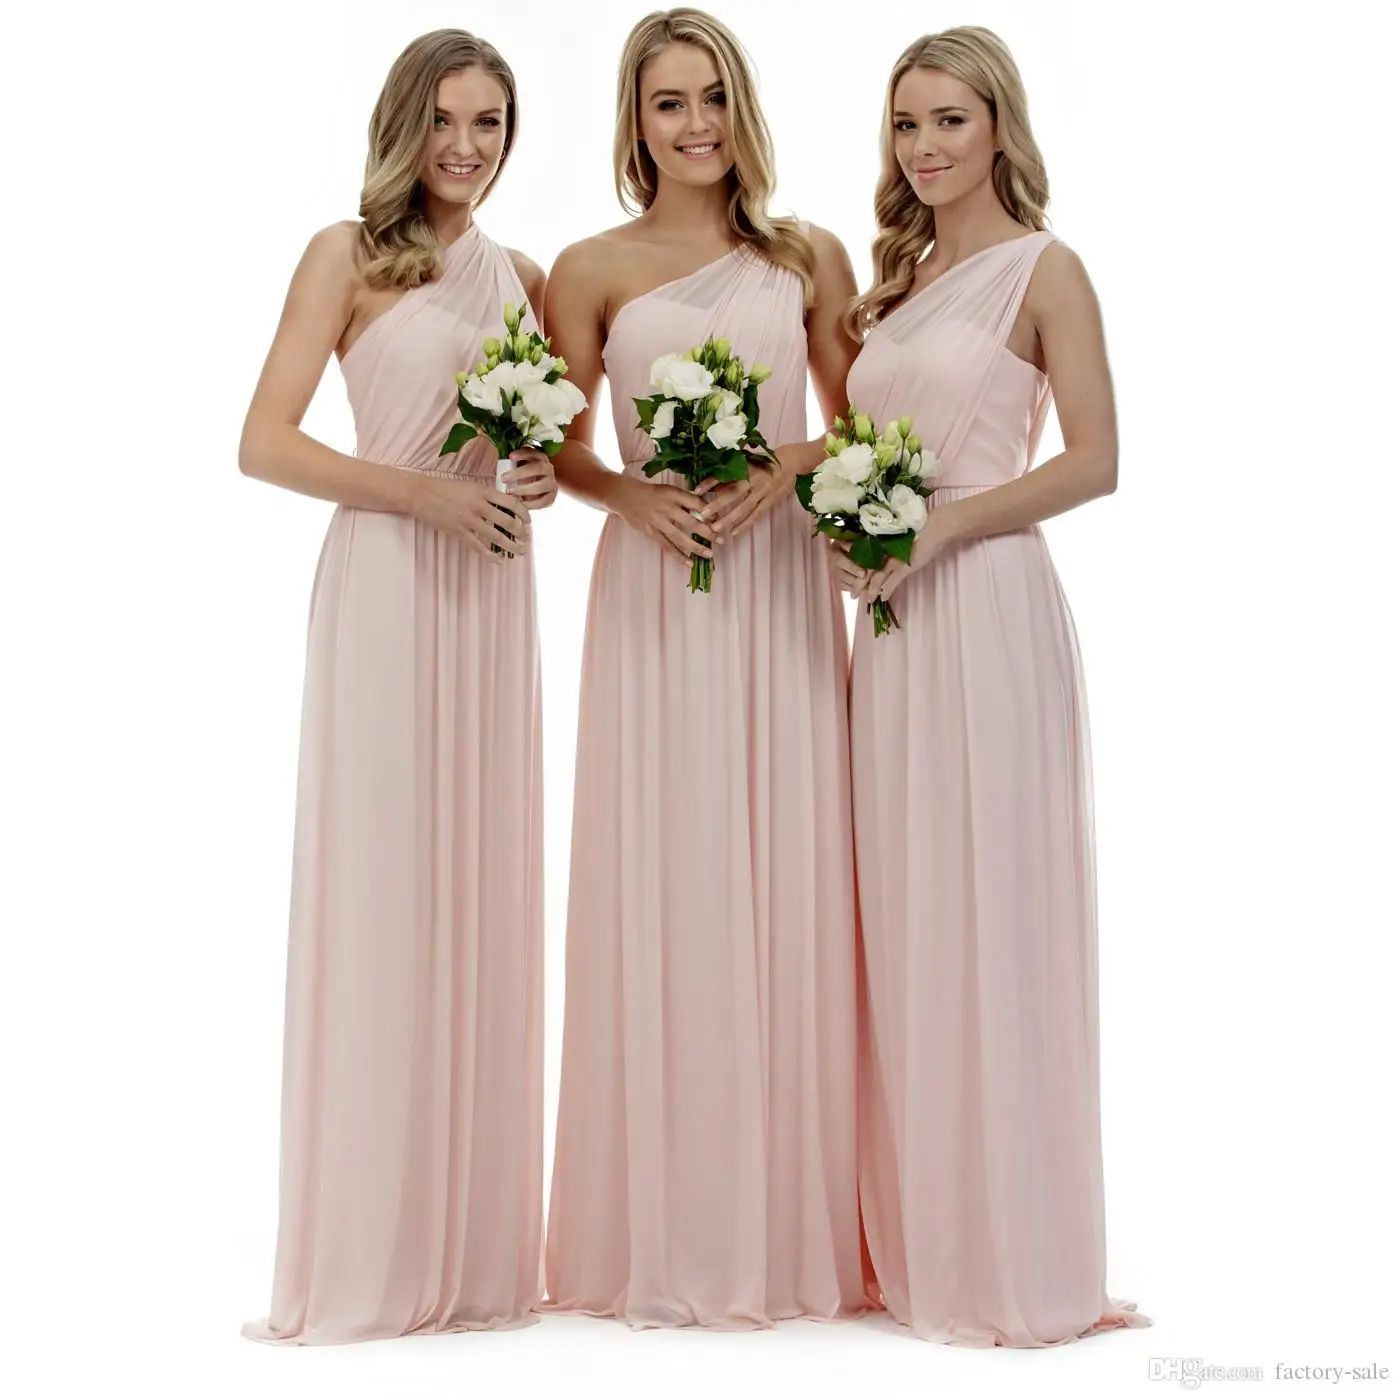 

Blush Pink One Shoulder Bridesmaid Dresses A Line Chiffon Pleats Floor Length Bridesmaids Gowns for Summer Country Weddings